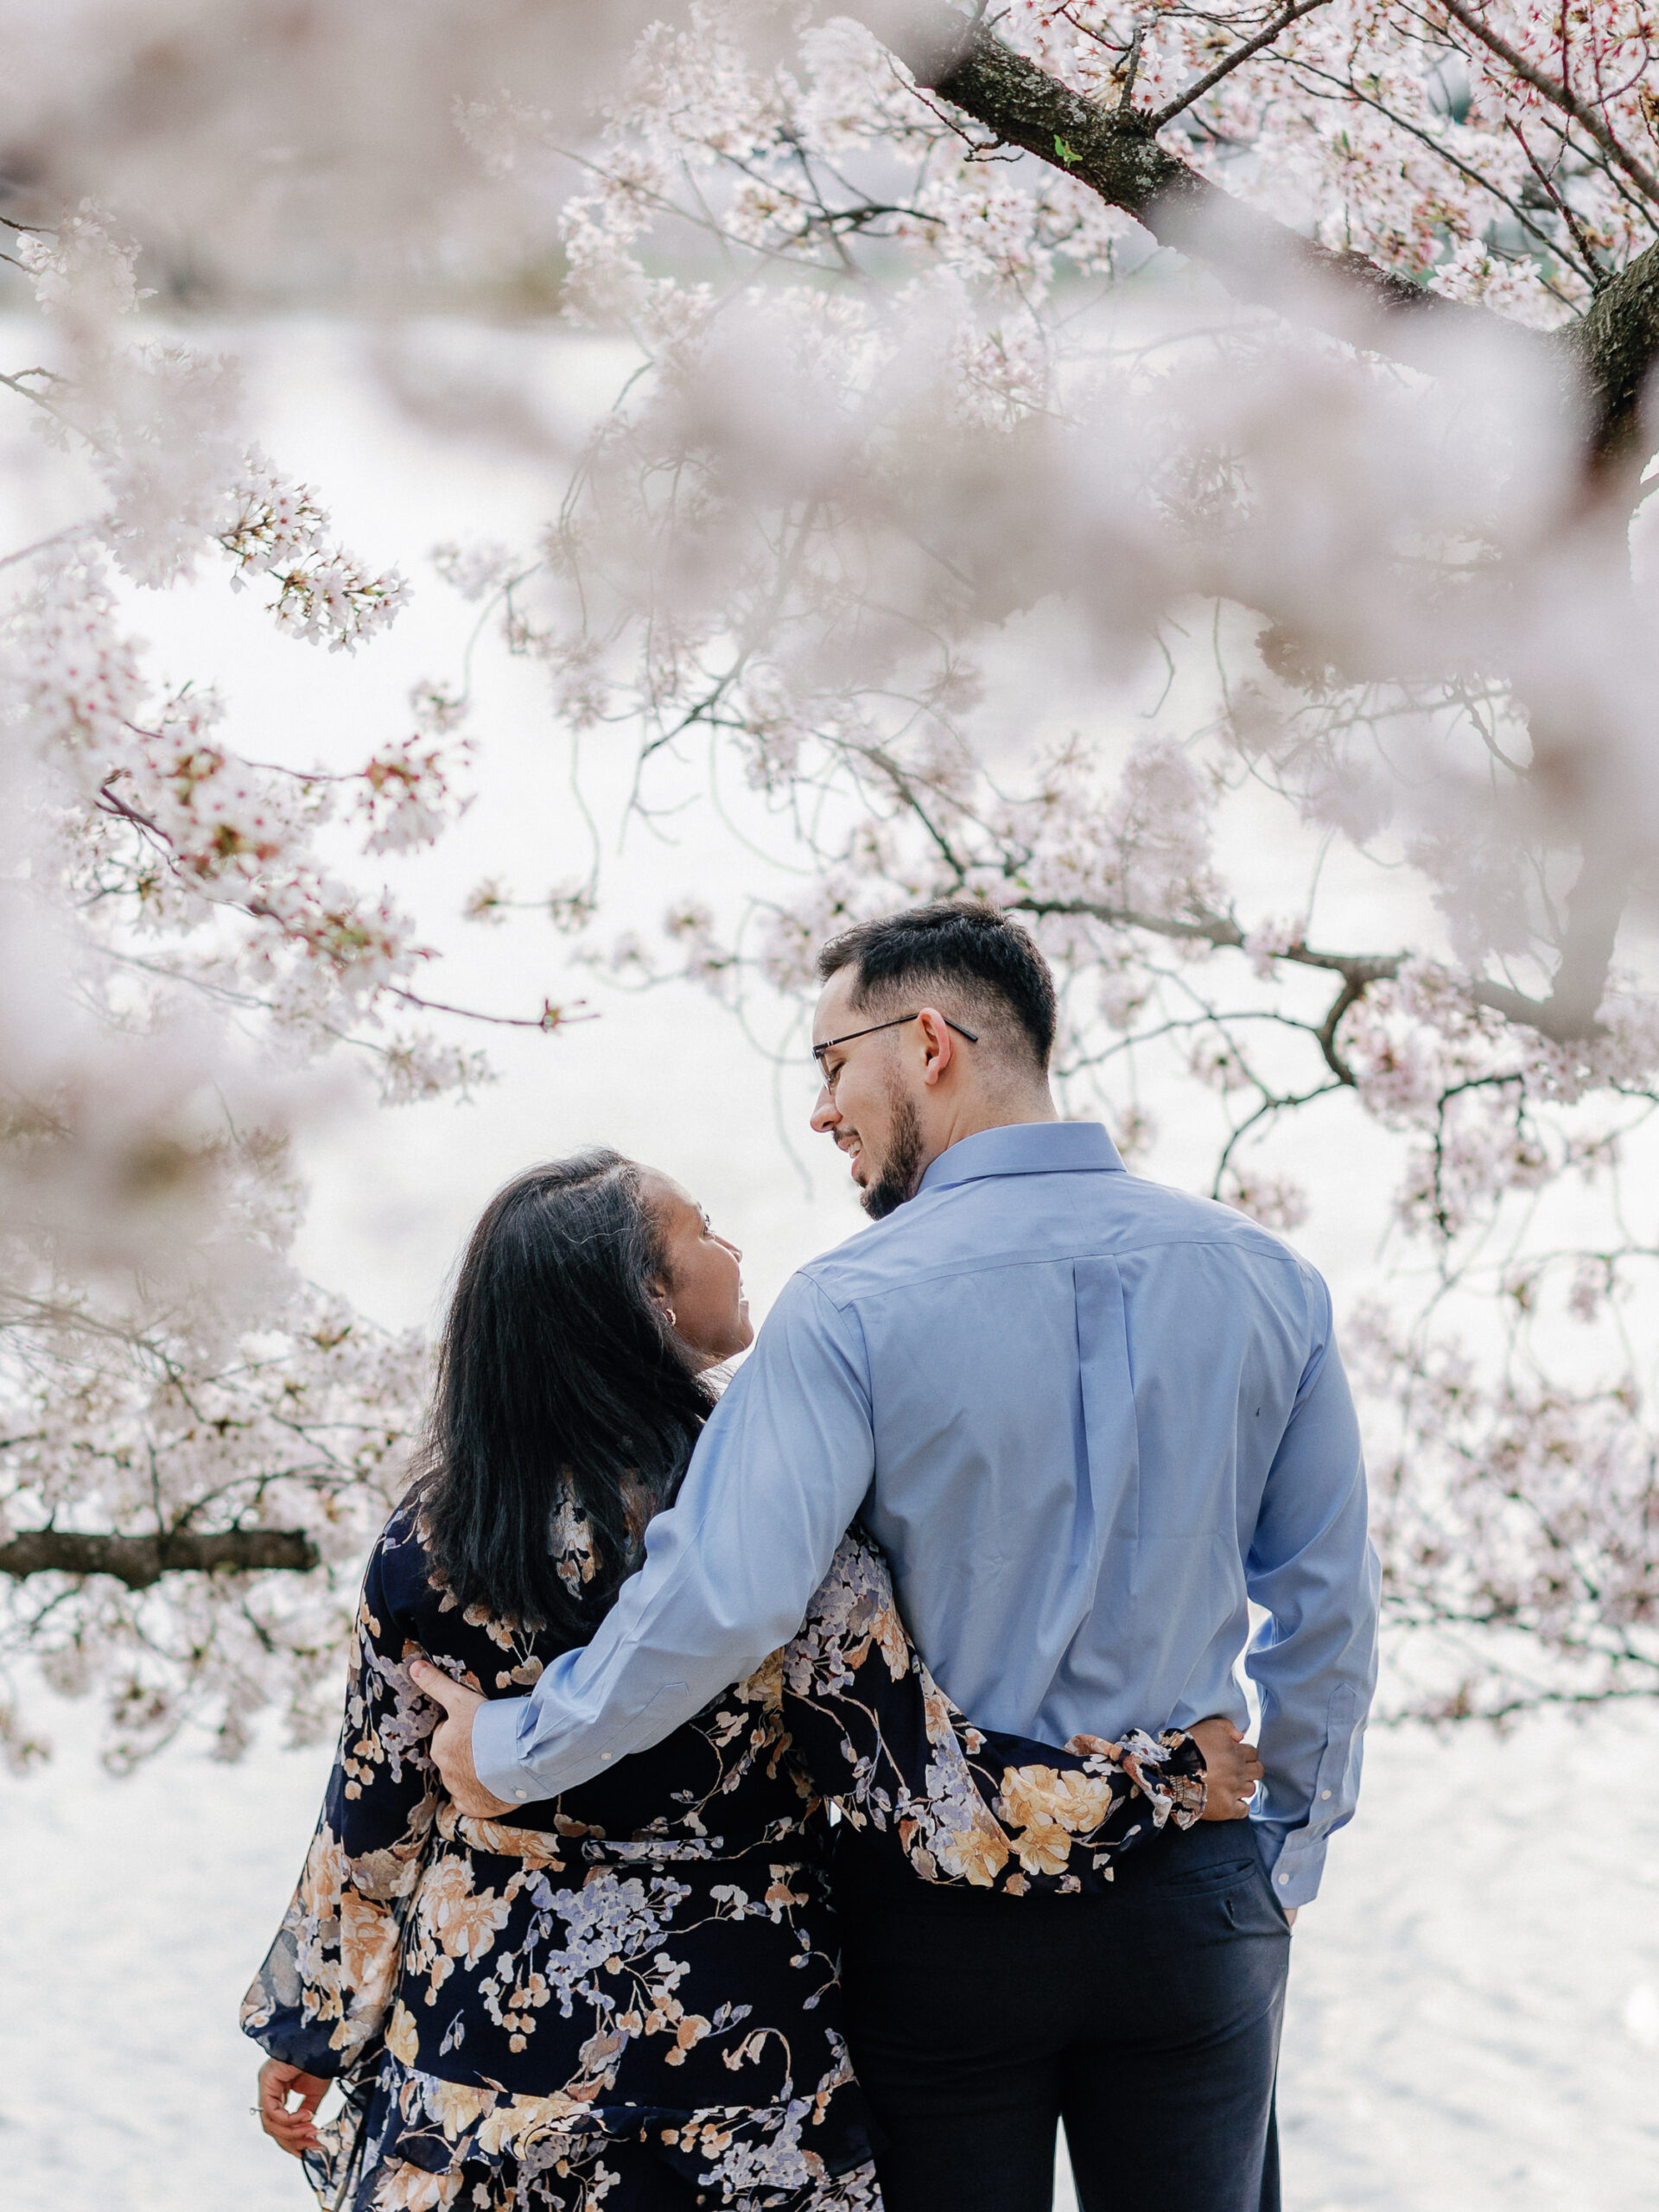 A newly engaged couple admiring each other underneath cherry blossom trees.